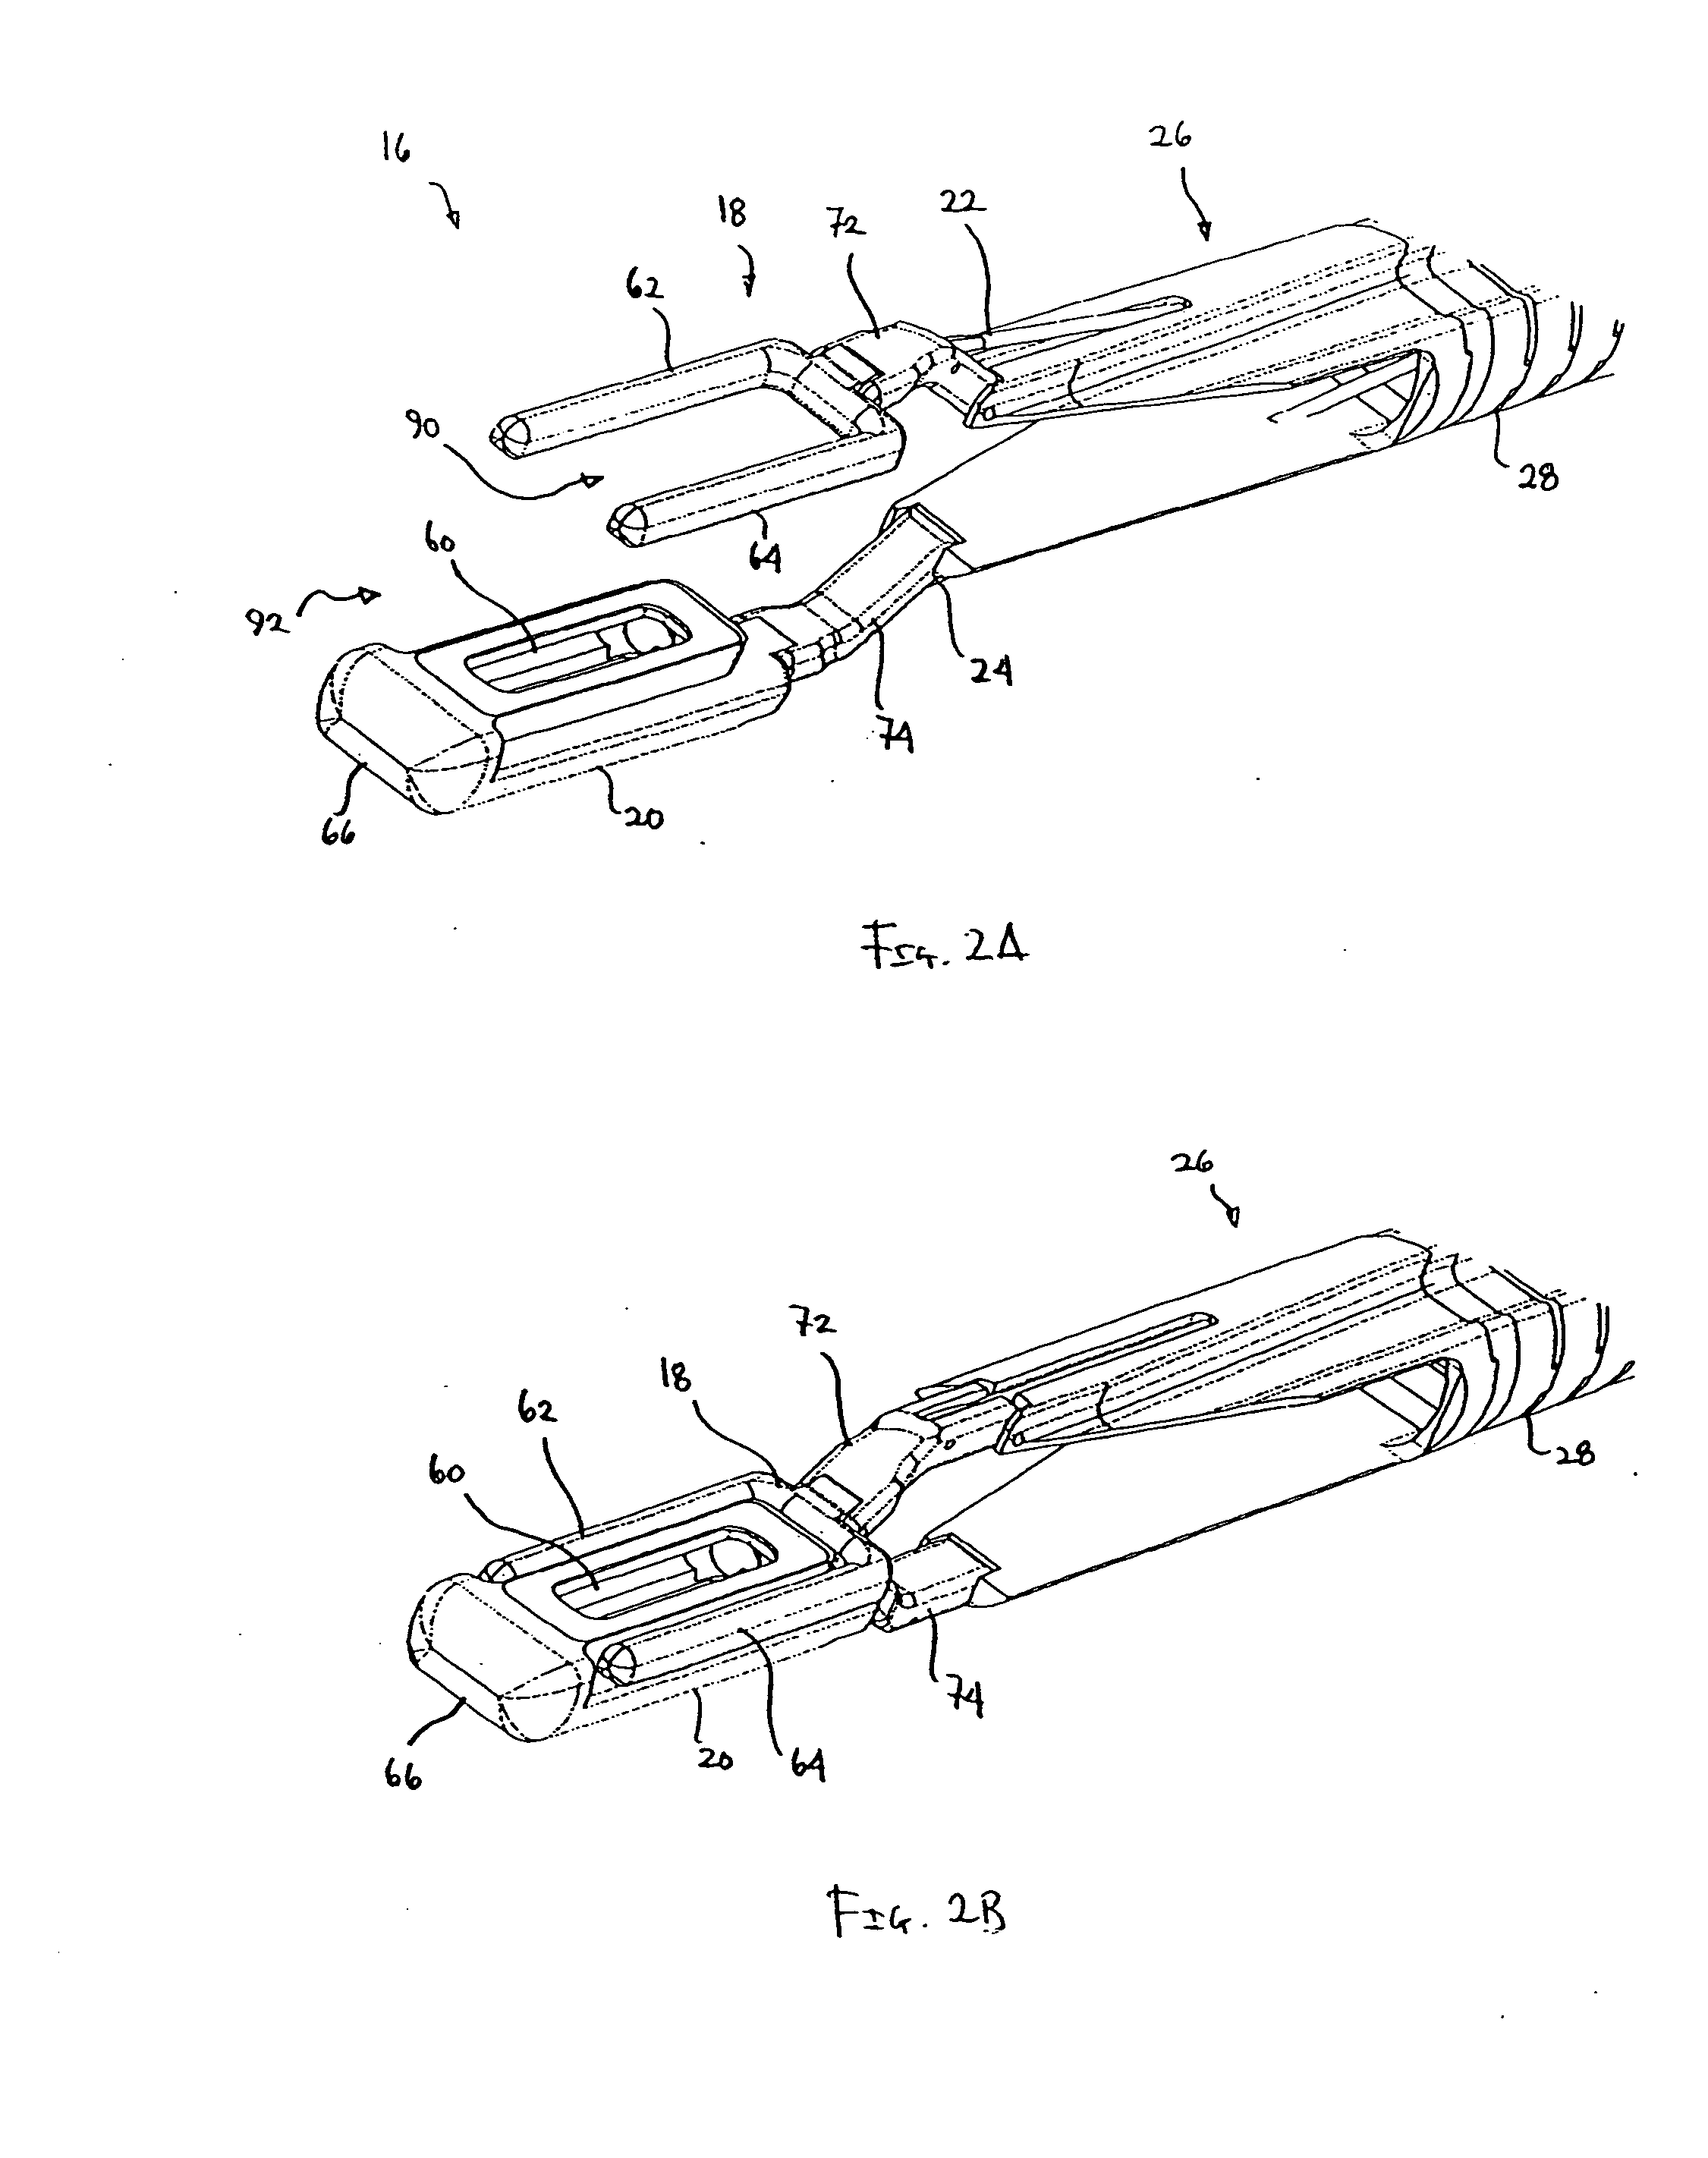 Single fold system for tissue approximation and fixation